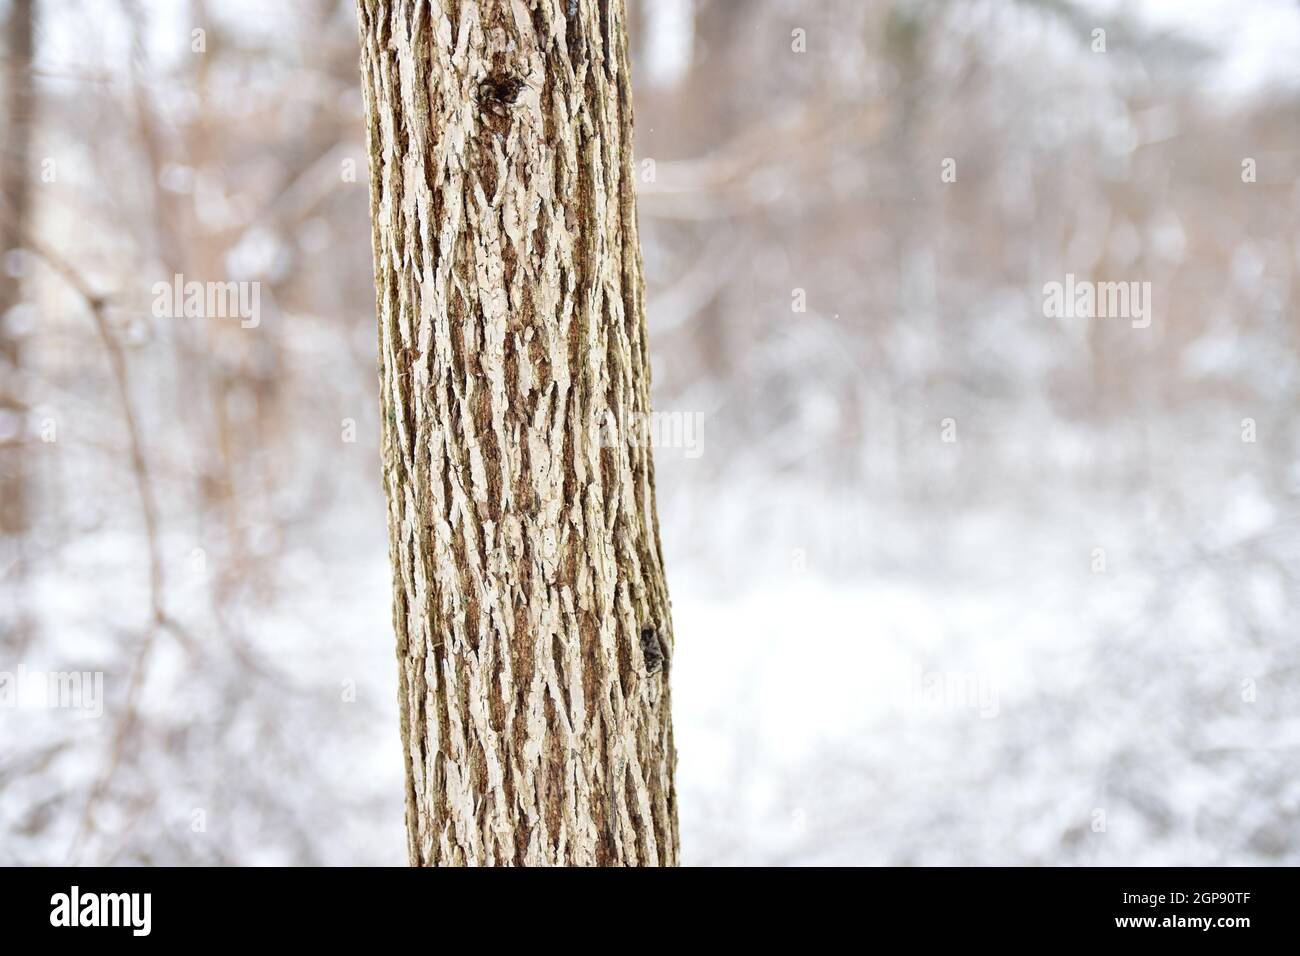 A tree trunk with deeply grooved bark stands with a blur of snowy woodland in the background. Copy space. Stock Photo